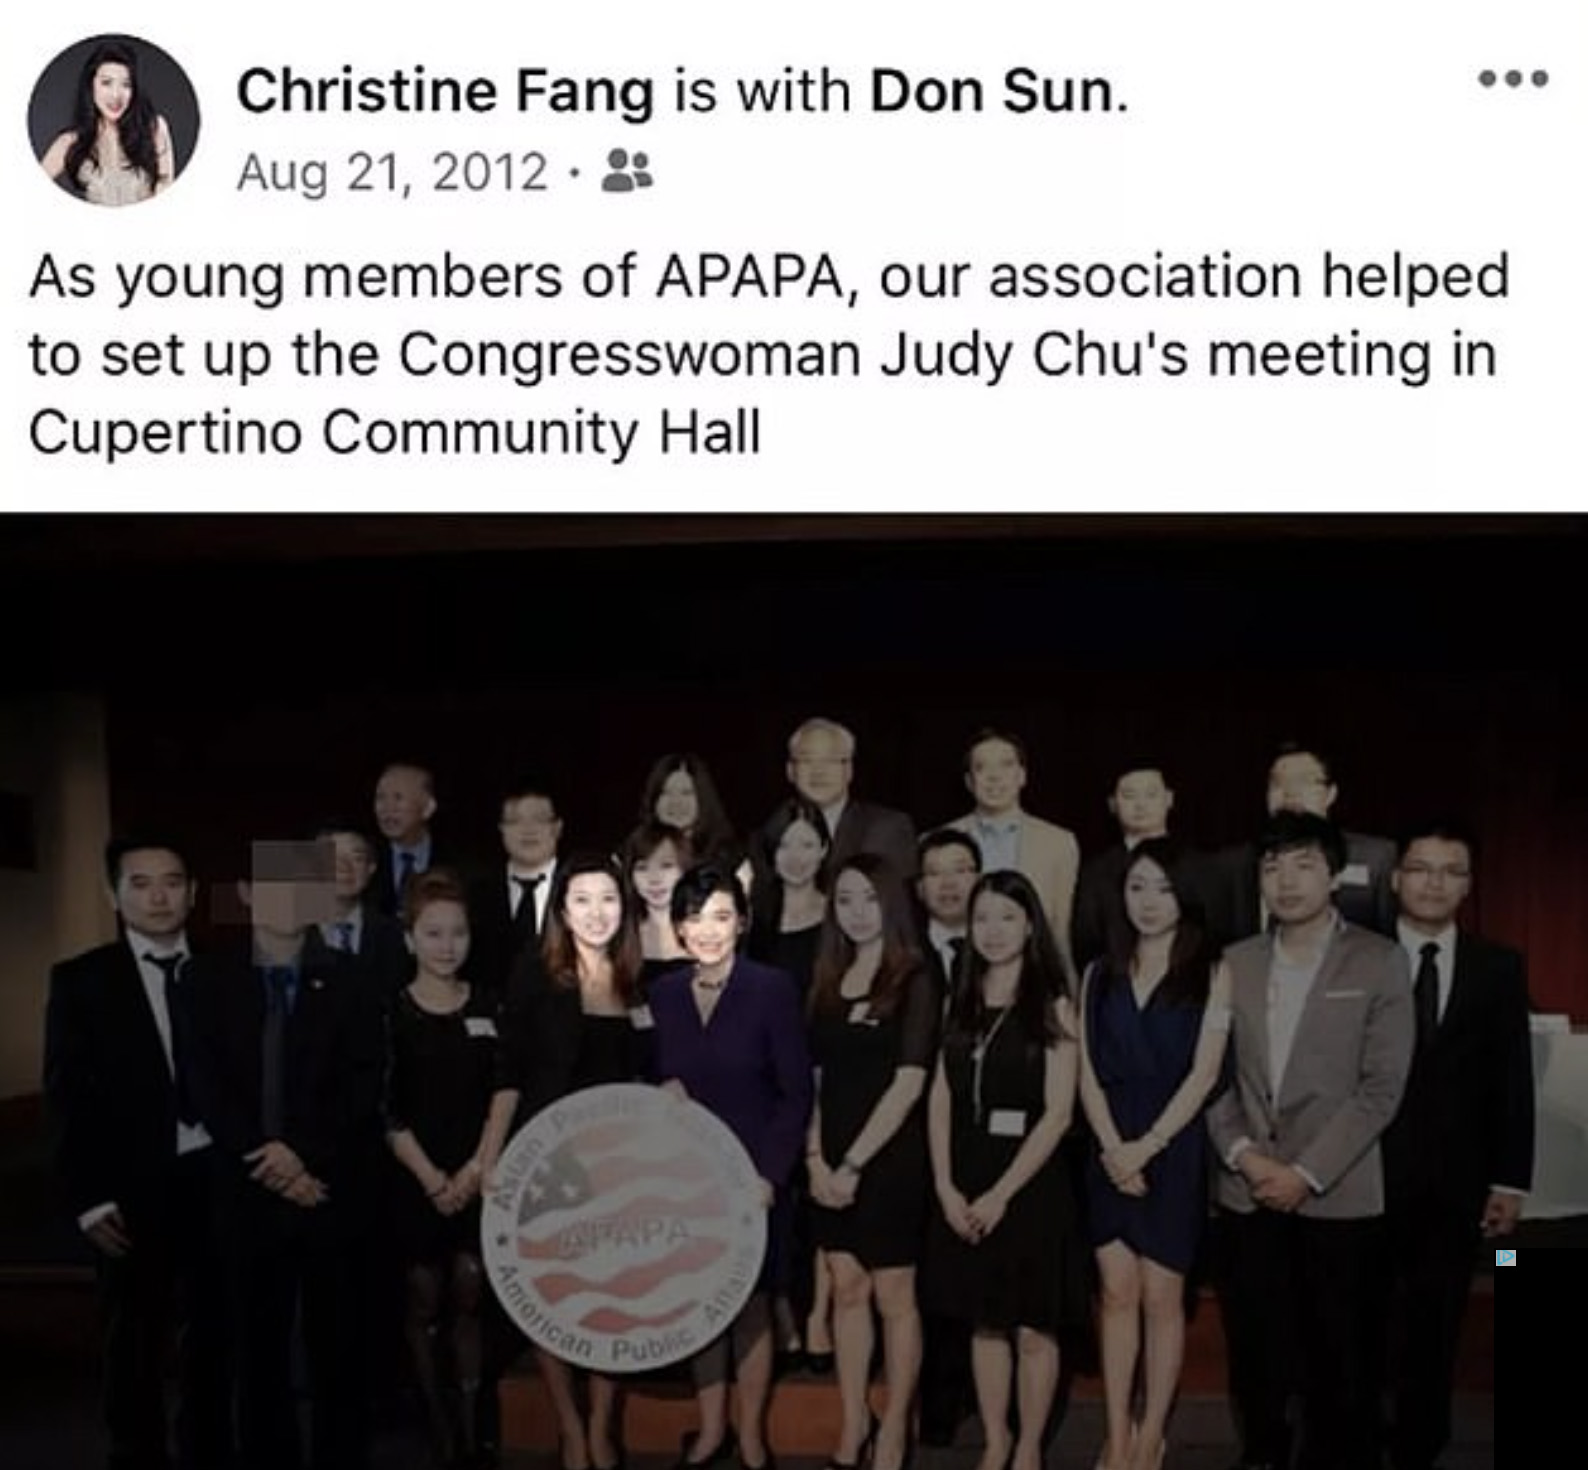 Fang served as the president of the Chinese Student Association and the campus chapter of APAPA